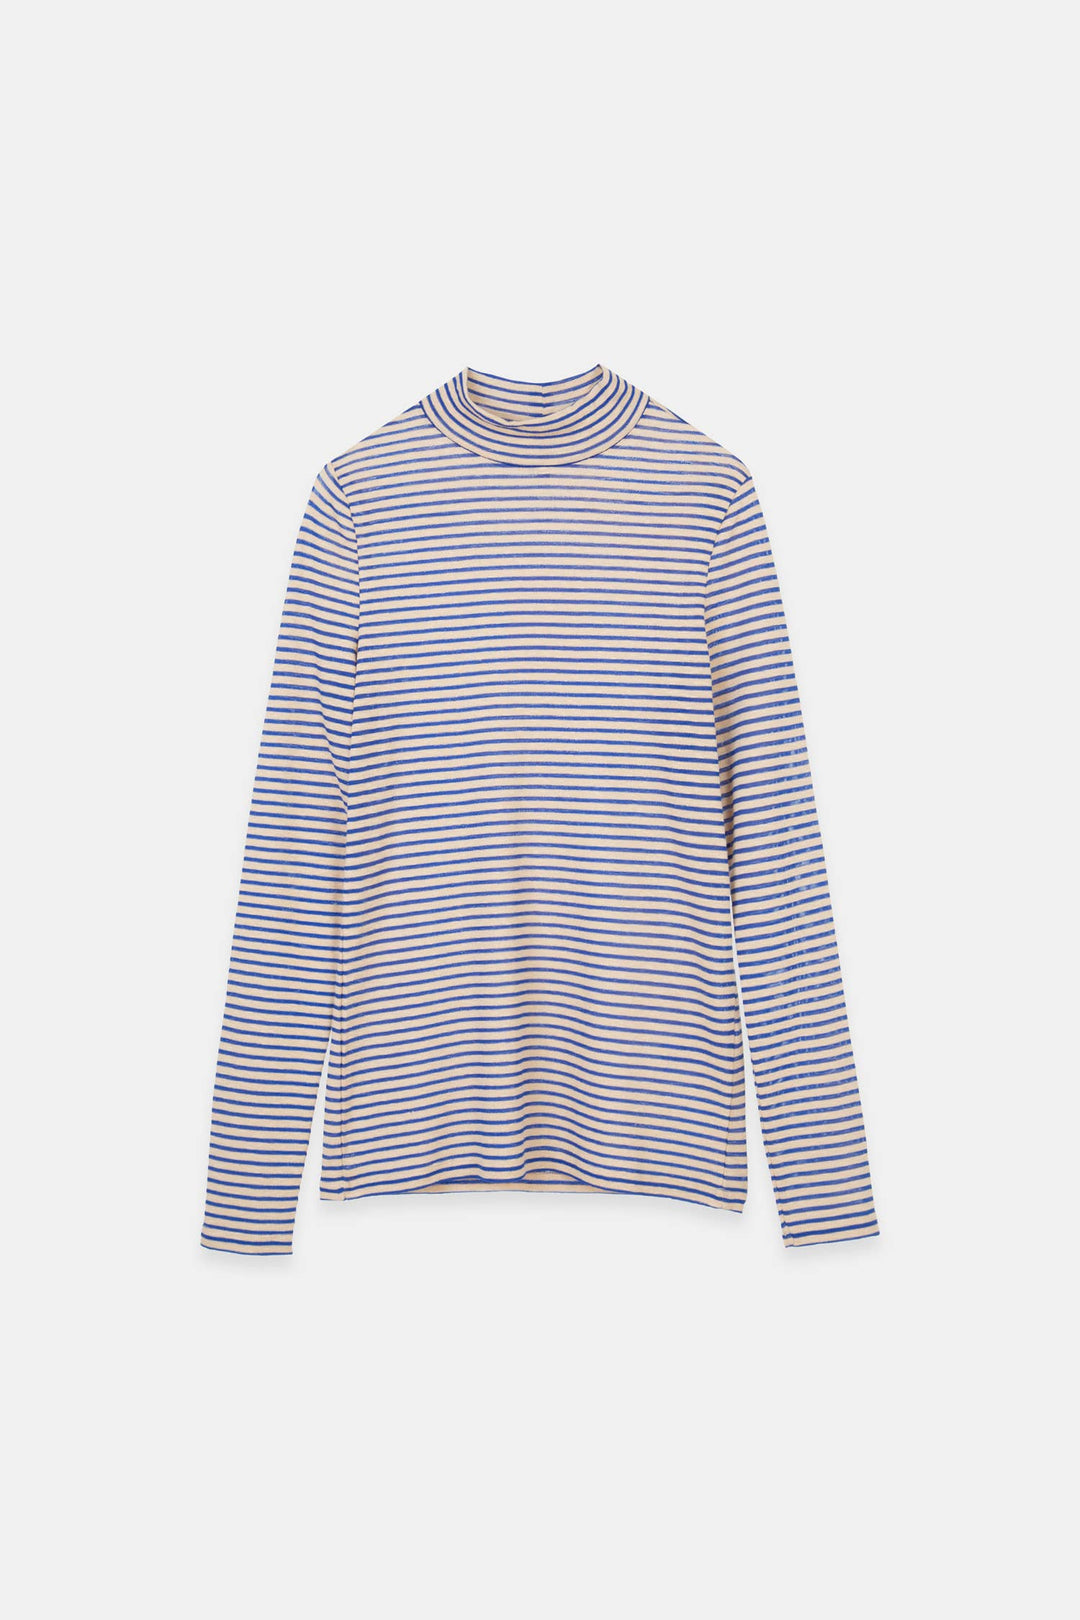 Striped T-Shirt with High Collar - Tan and Blue Sparkle